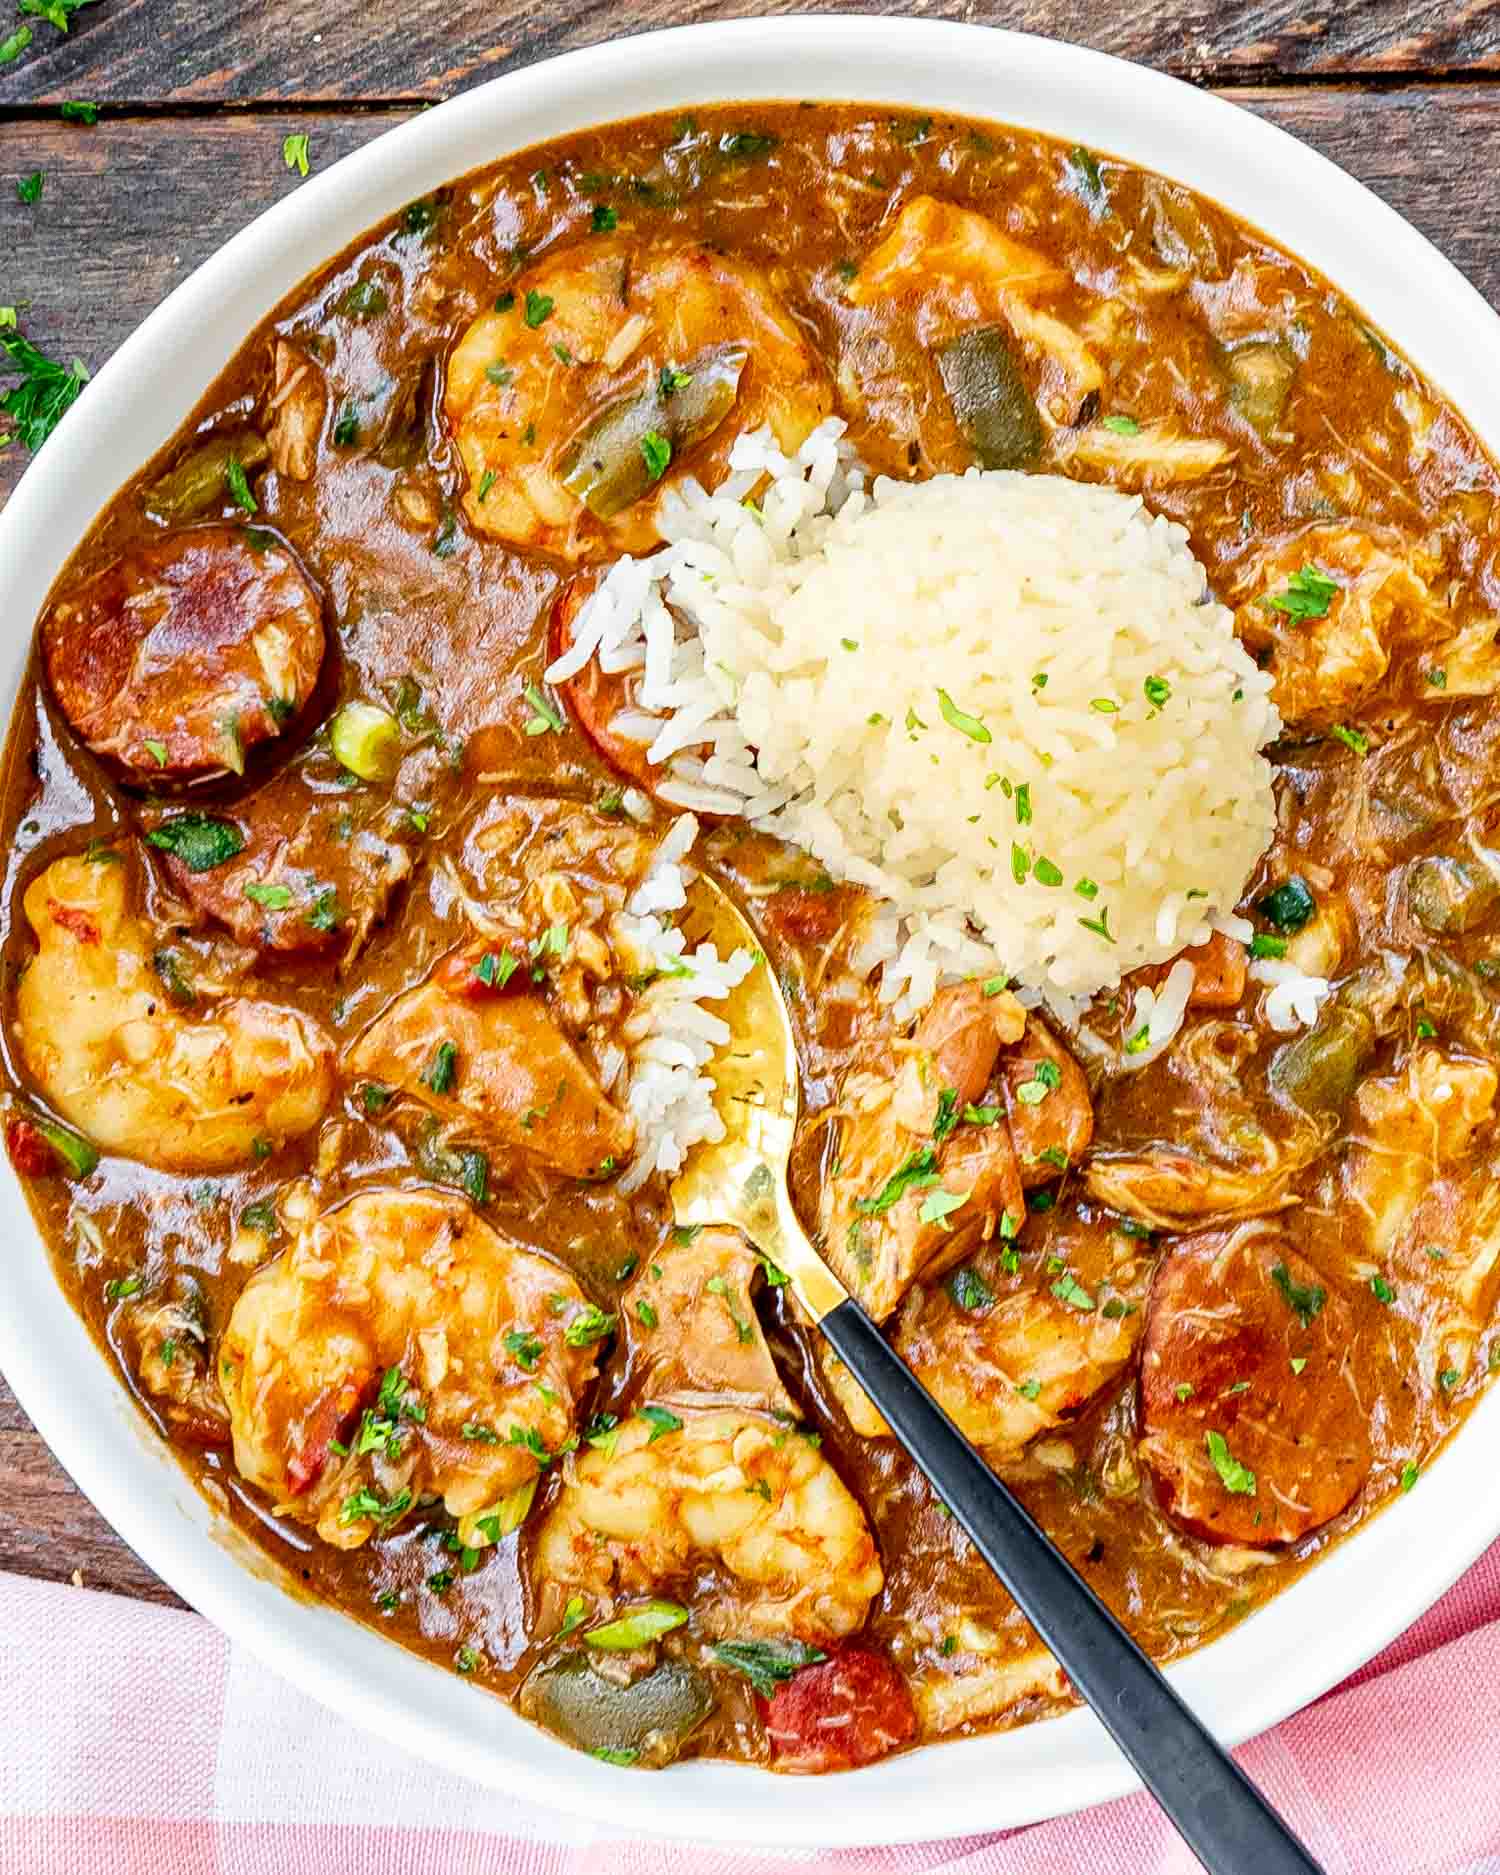 freshly made gumbo in a white bowl with a scoop of rice and garnished with some parsley.